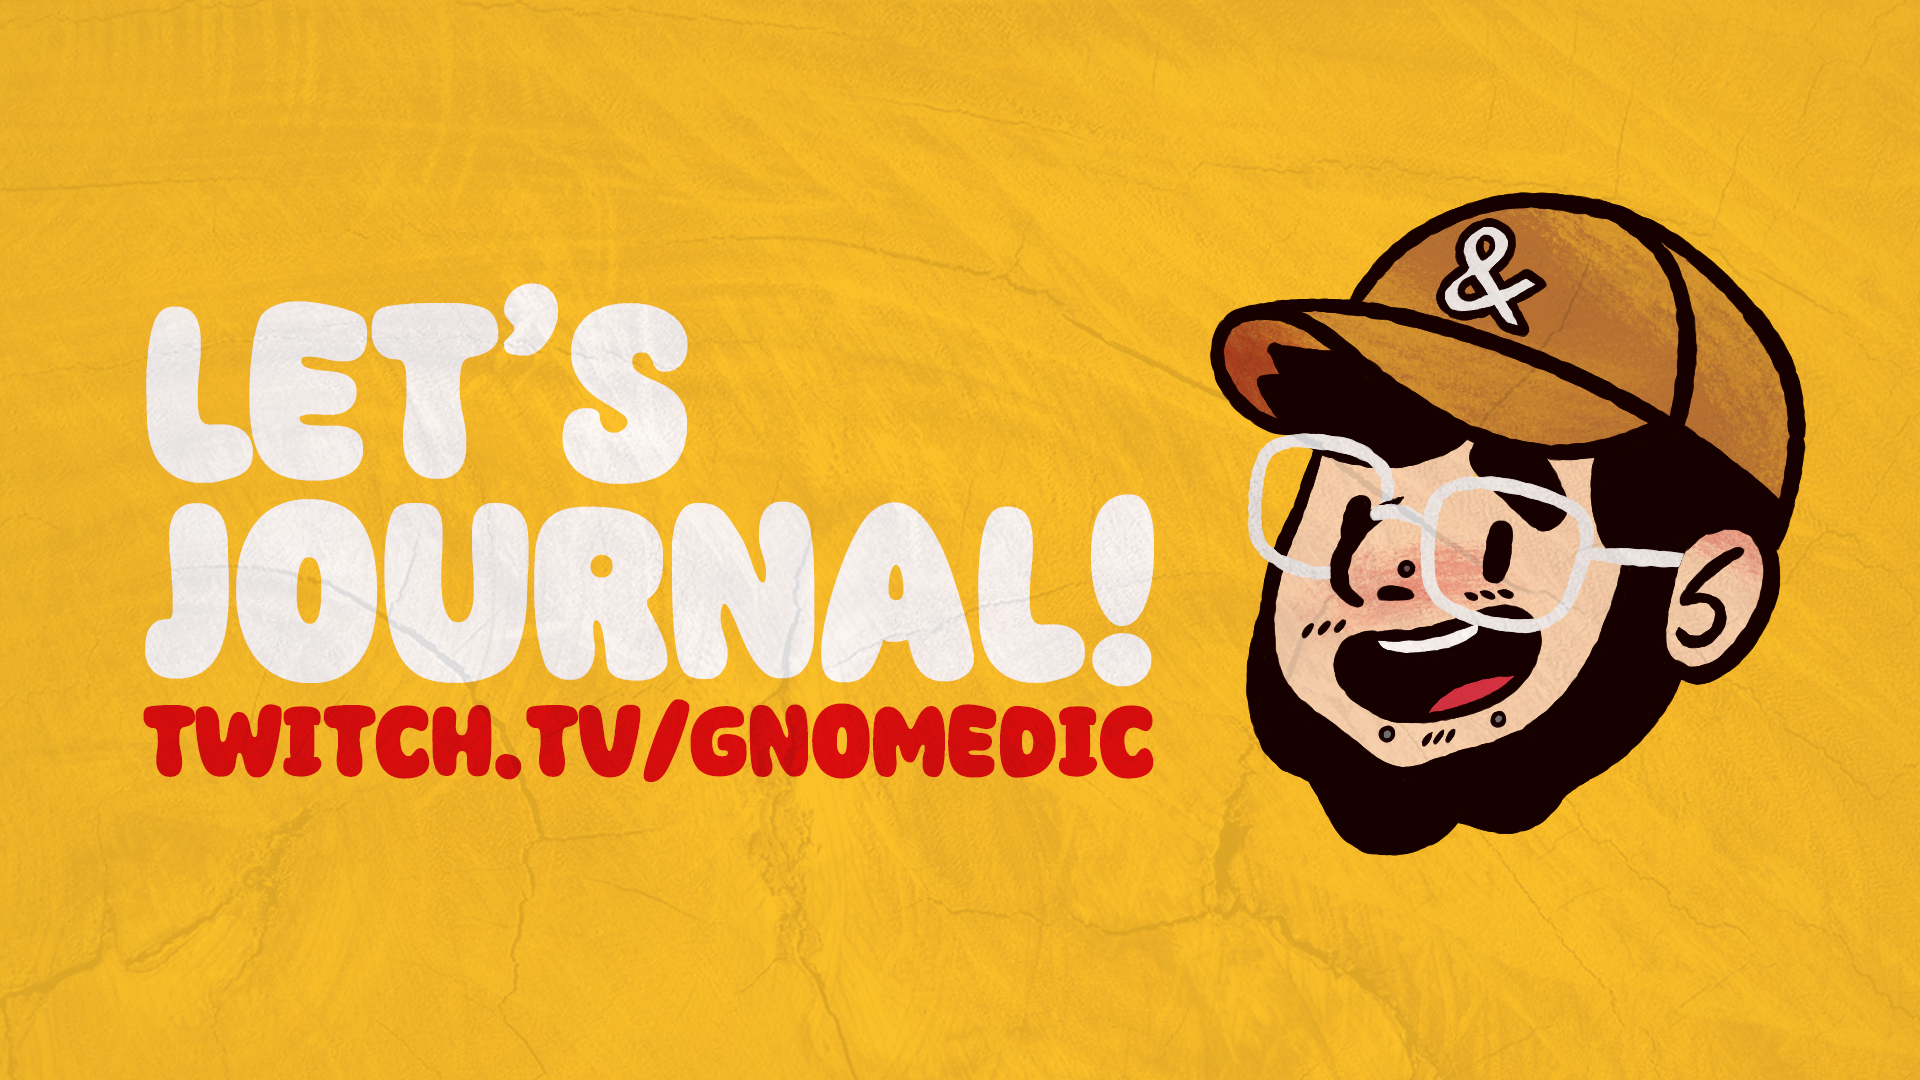 let's journal! twitch.tv/gnomedic